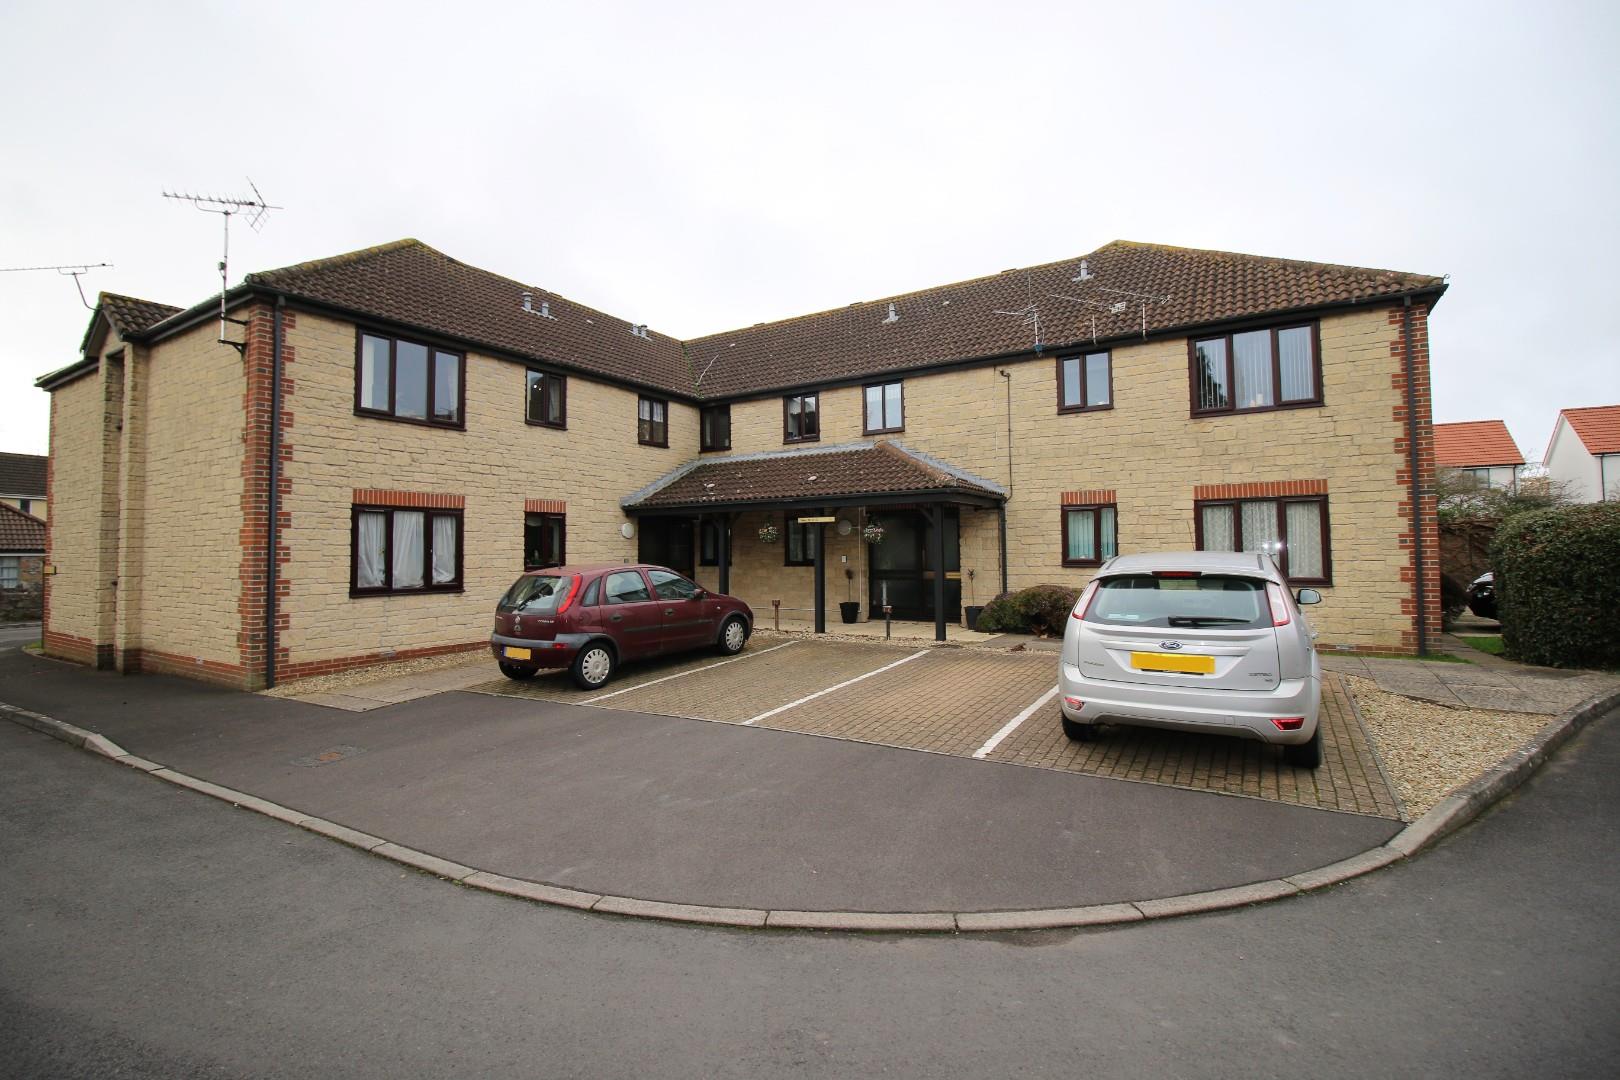 Over 60's retirement apartment offering fantastic value for money in Congresbury